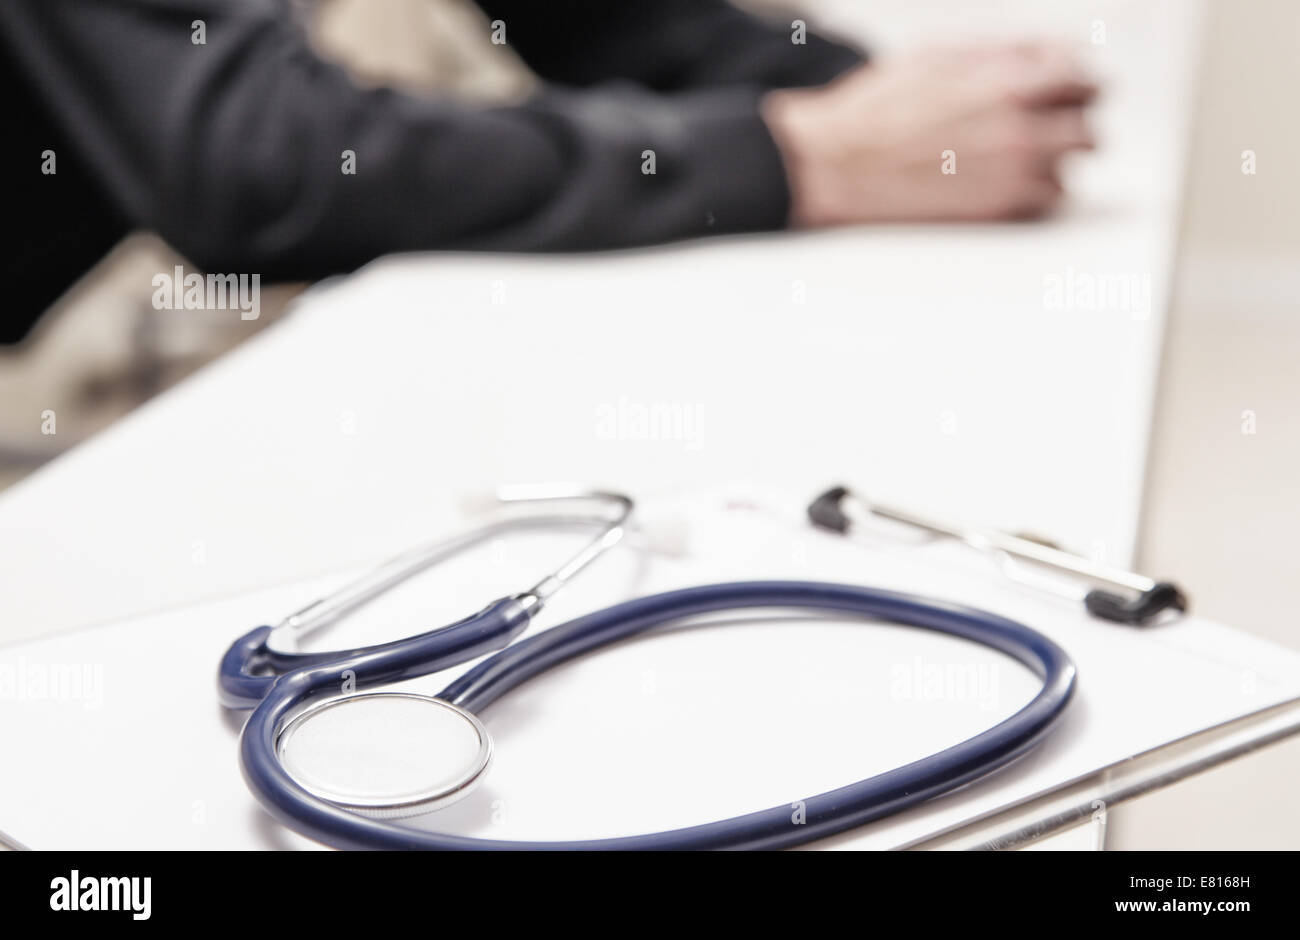 Stethoscope on the desk with doctor in background. Stock Photo